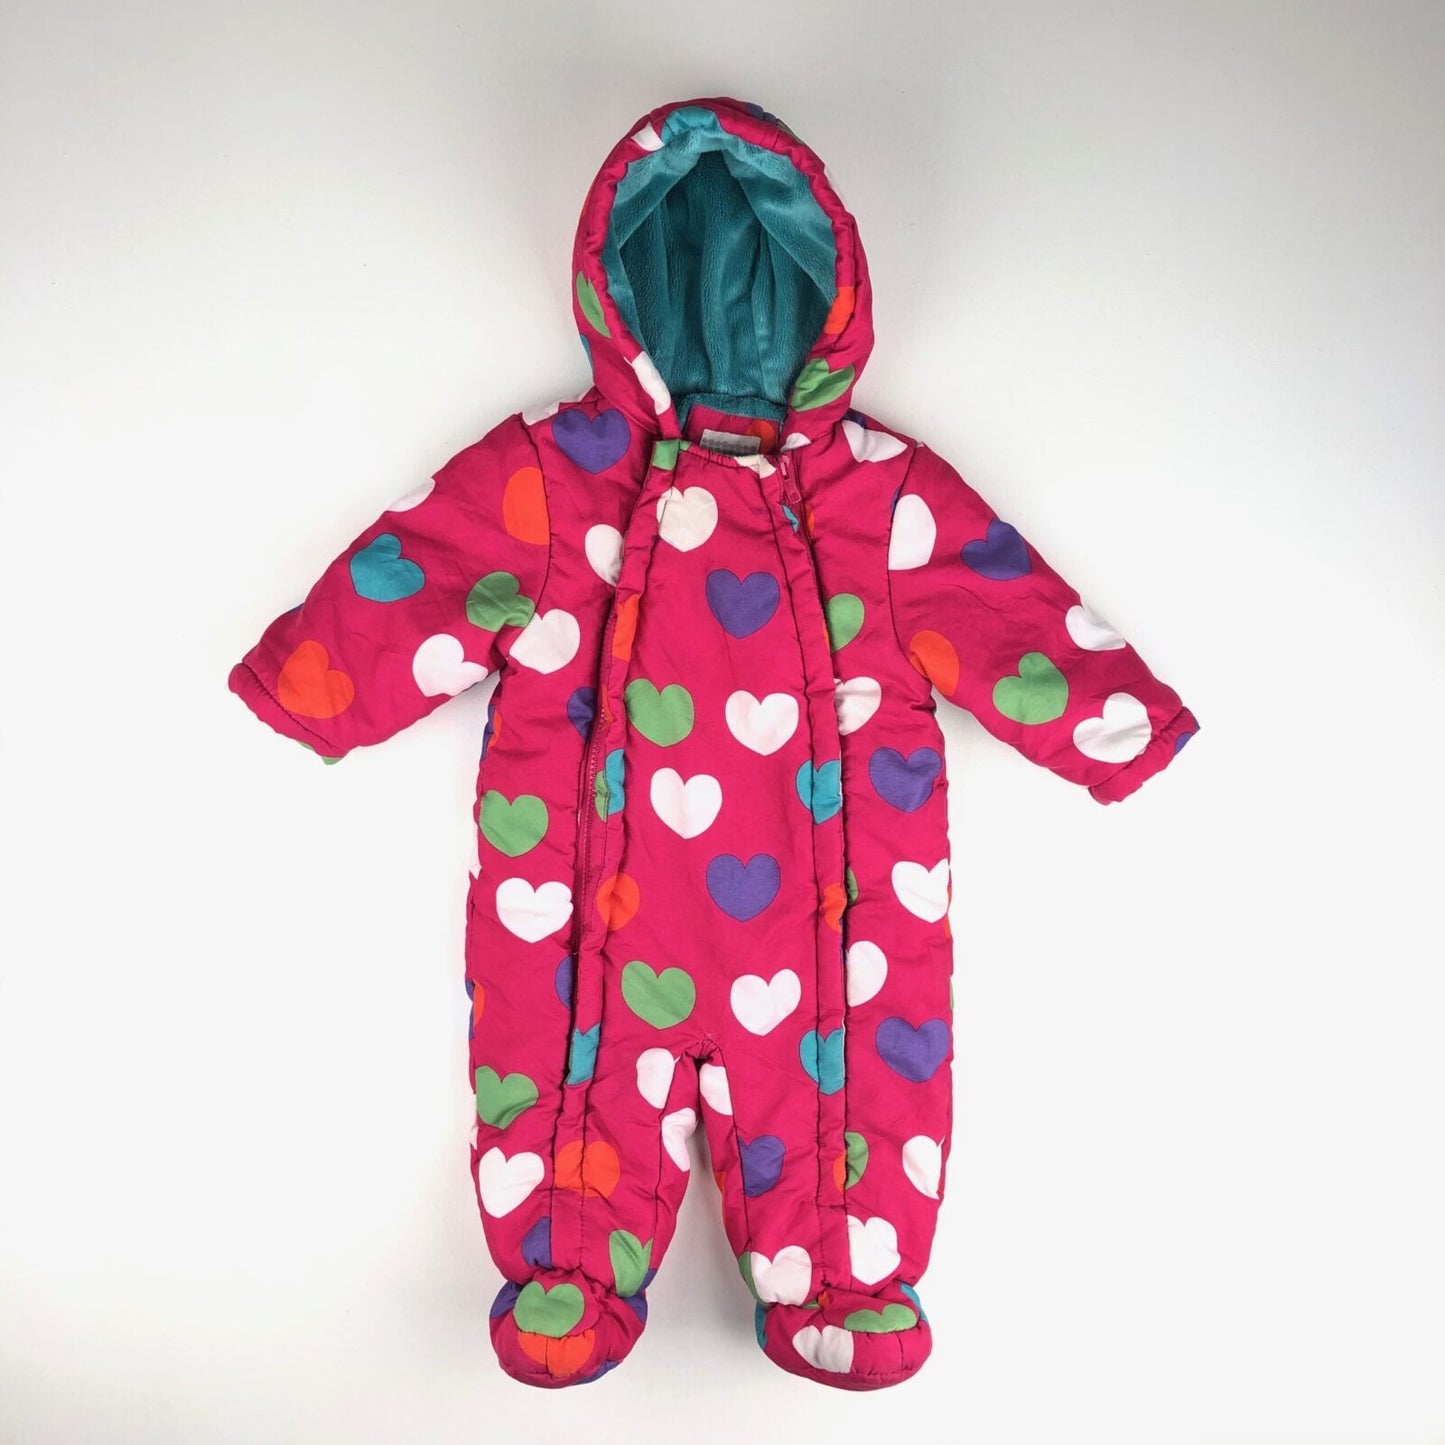 Bright heart print pram suit with furry lining